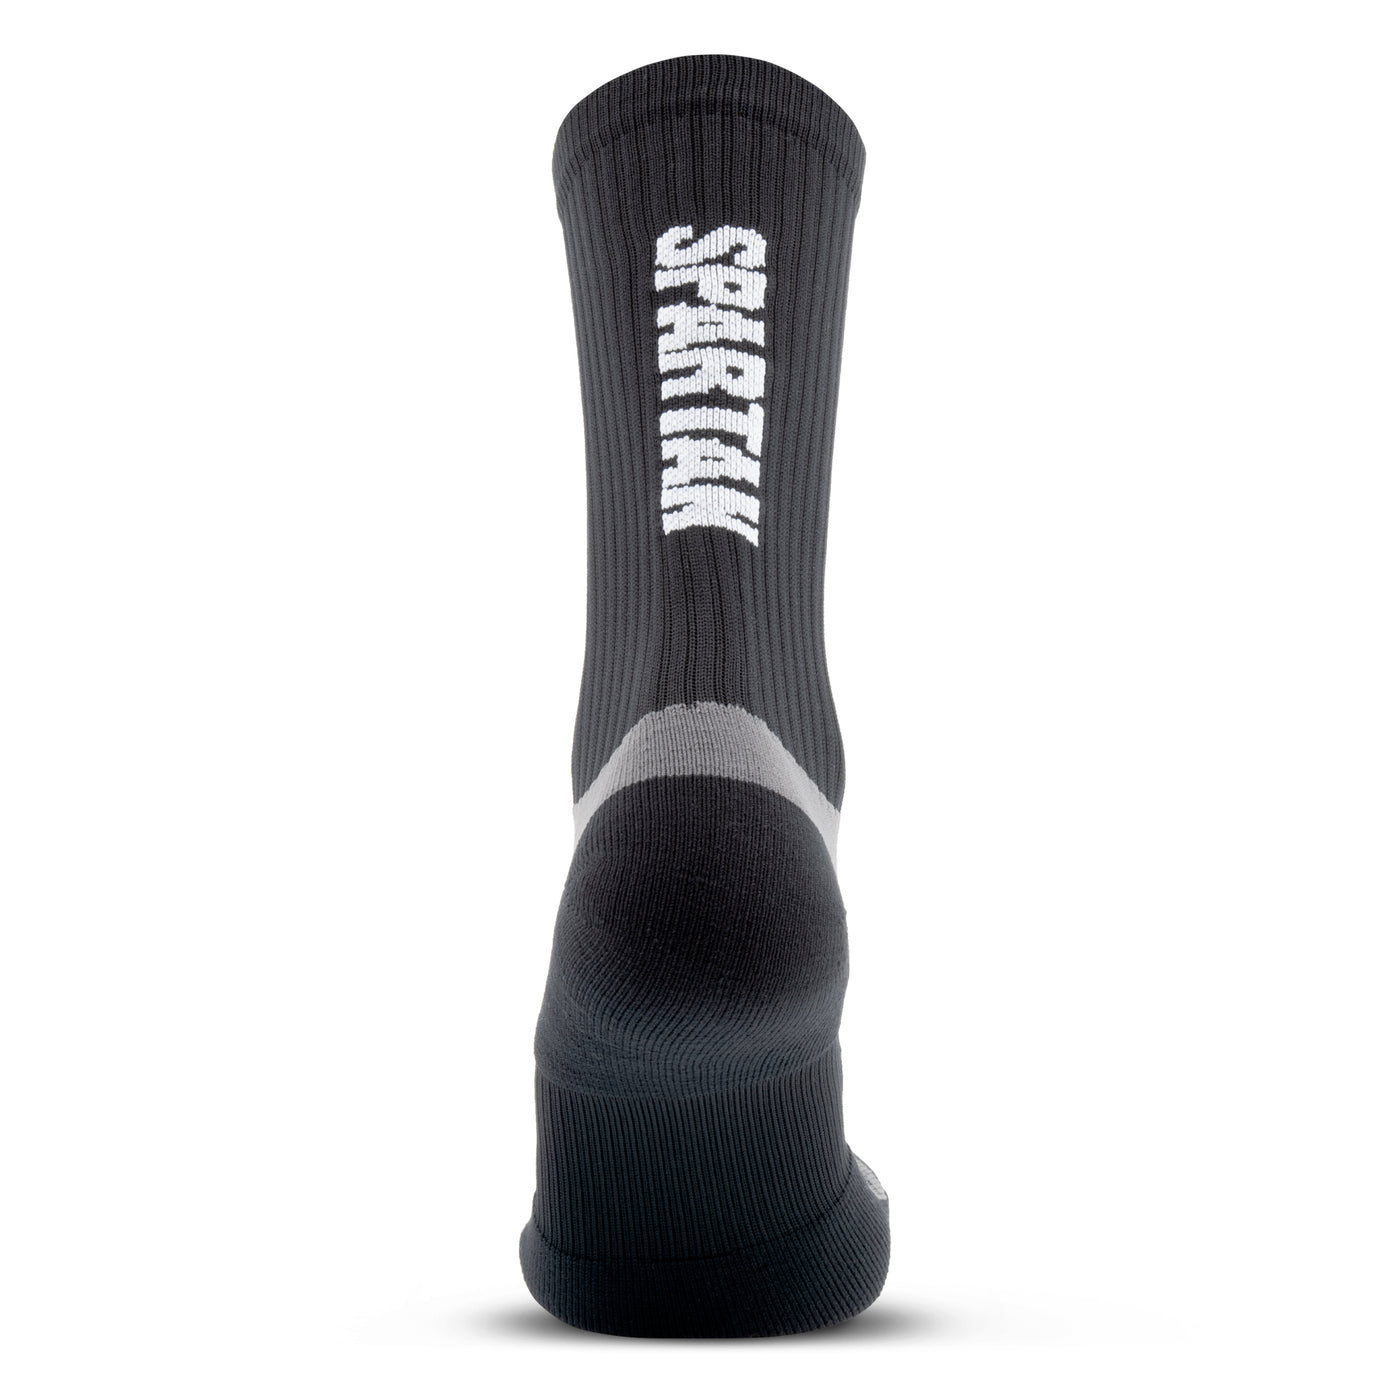 Obstacle SPARTAN  socks by Mudgear